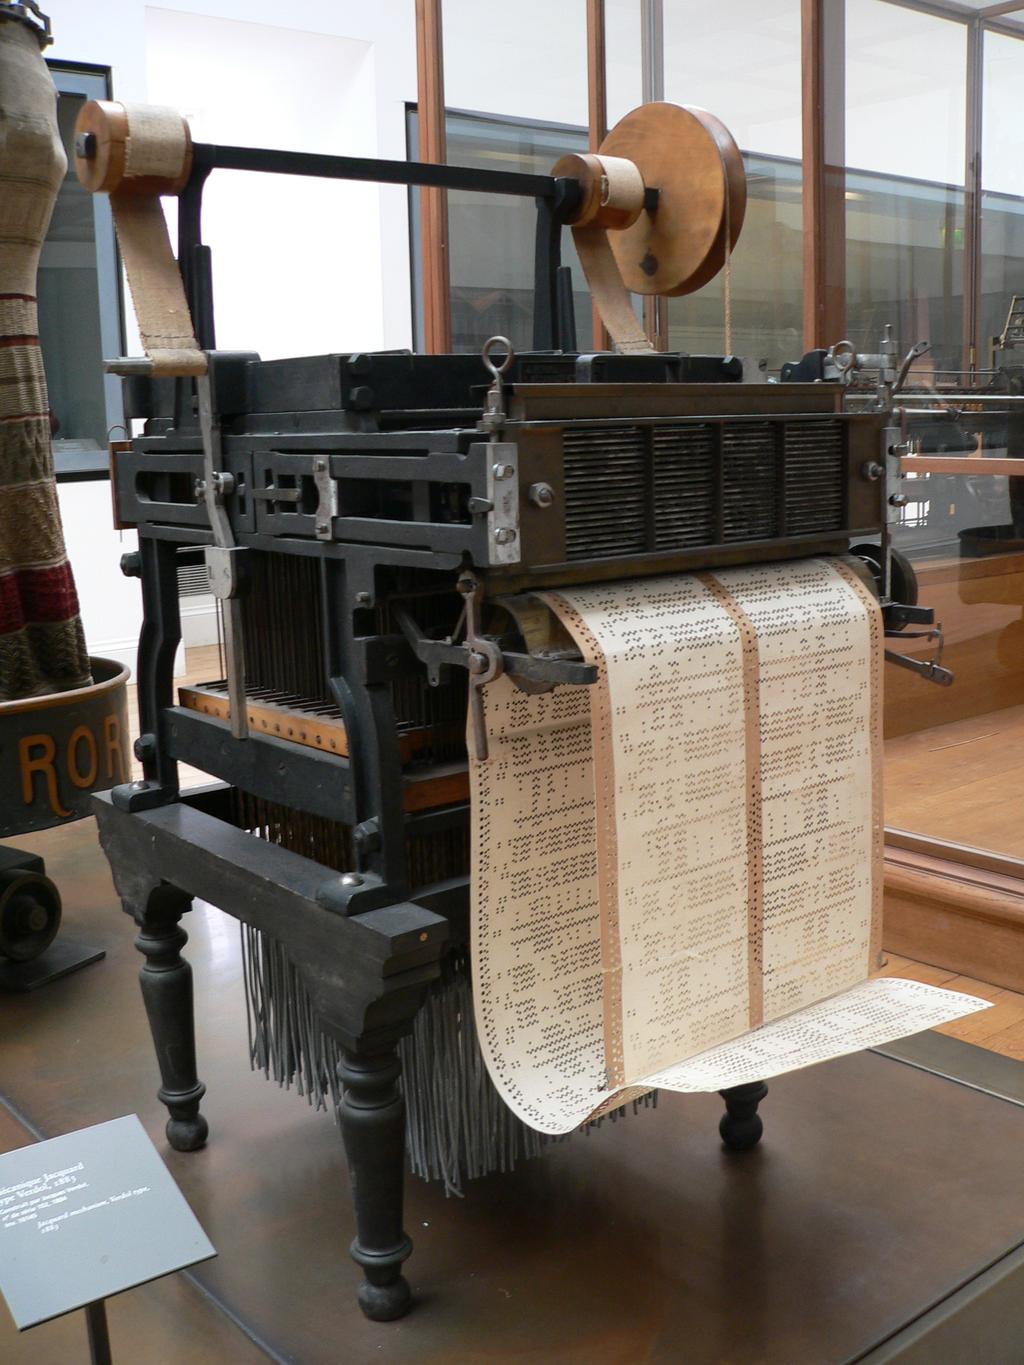 Early investigations: clues from technology Goal: building machines capable of autonomously performing some task. I Automata (e.g., jacquard loom, 1804) Cybernetics (feedback and control): N.